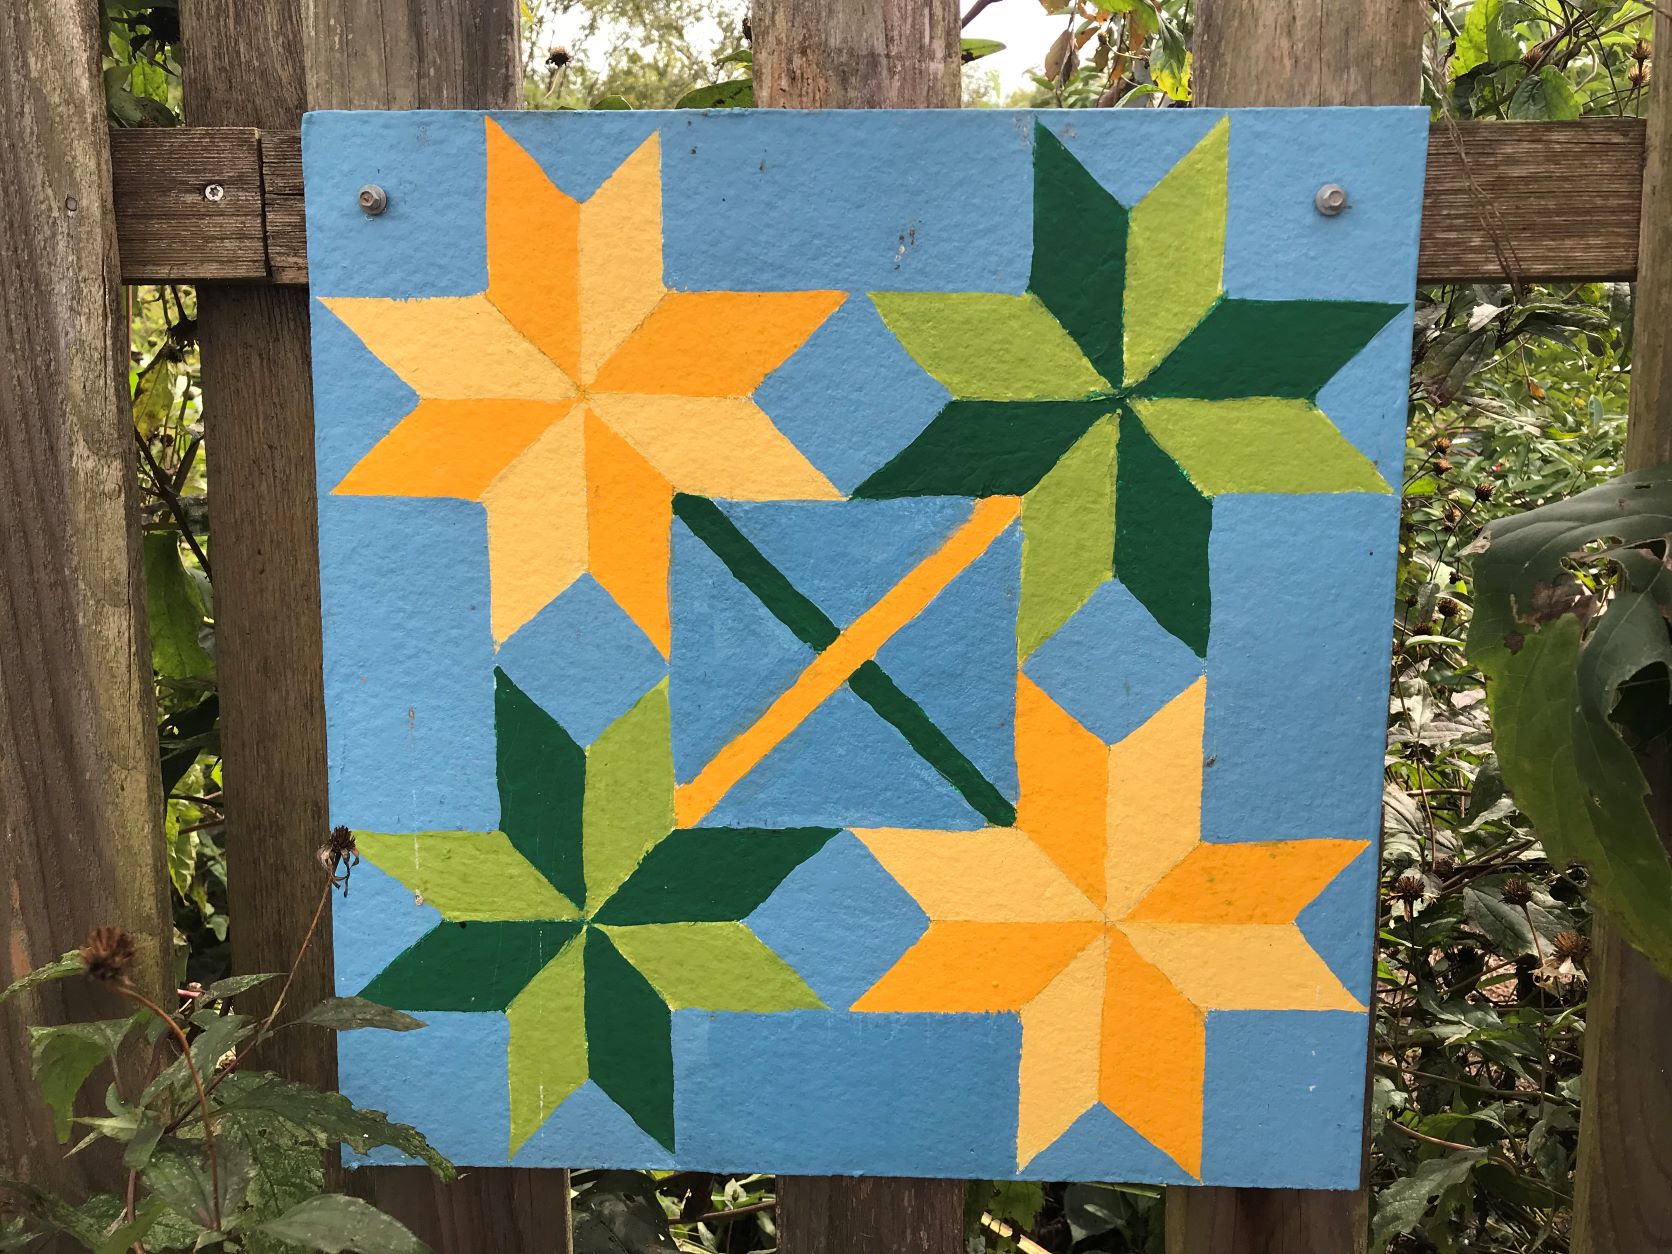 A picture of a quilt hung in the woods.